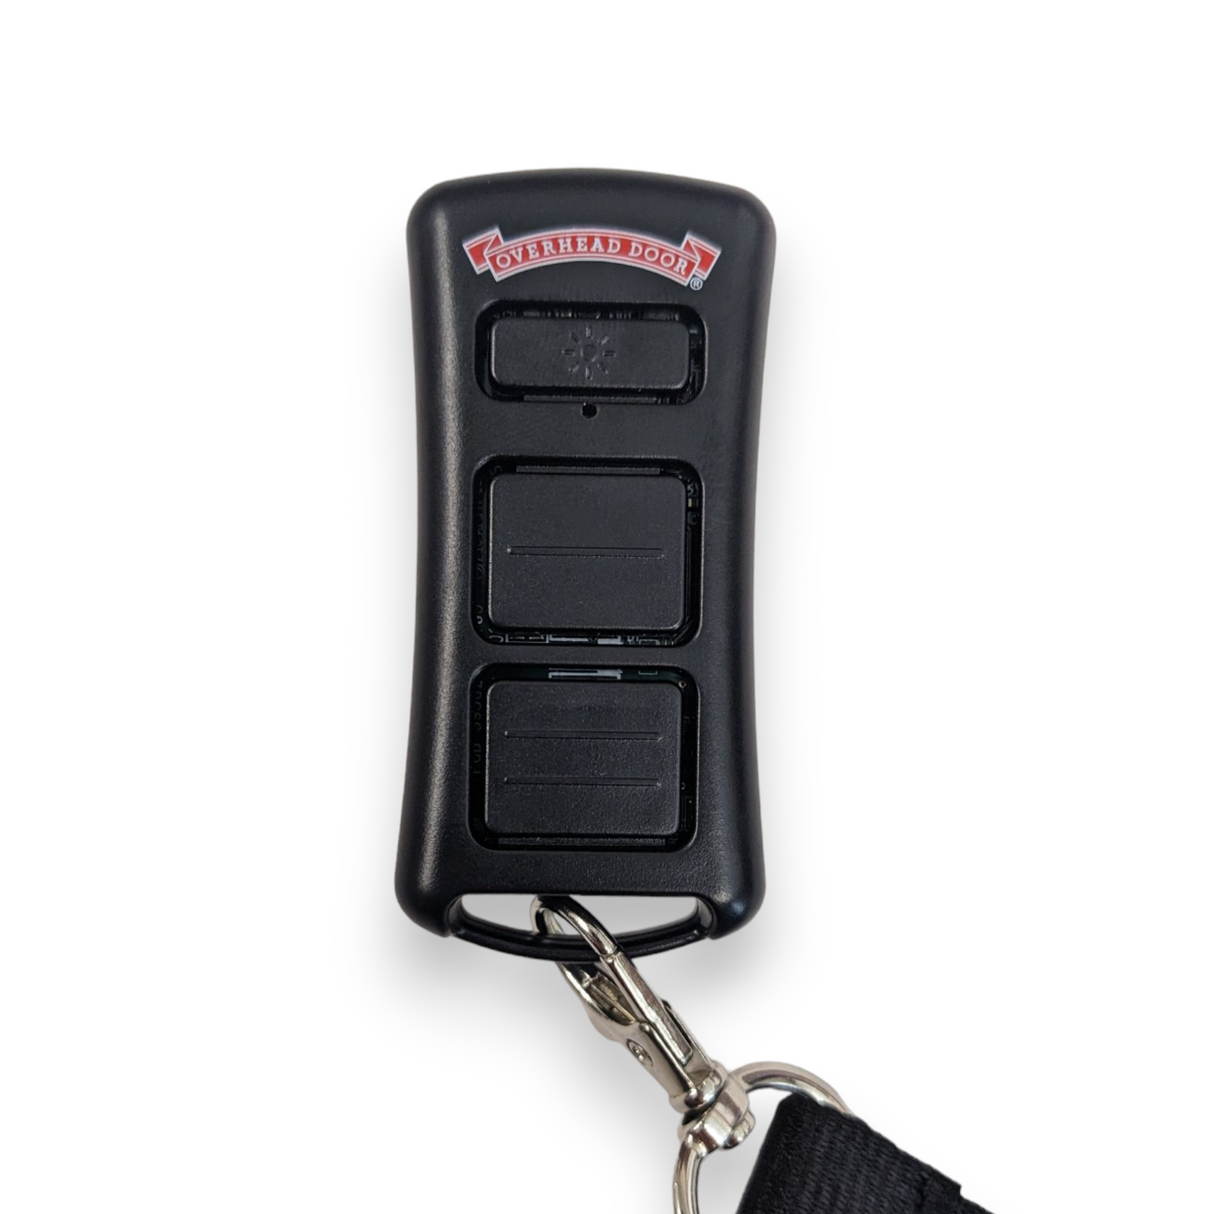 2 Button Remote with Flashlight | OL2T